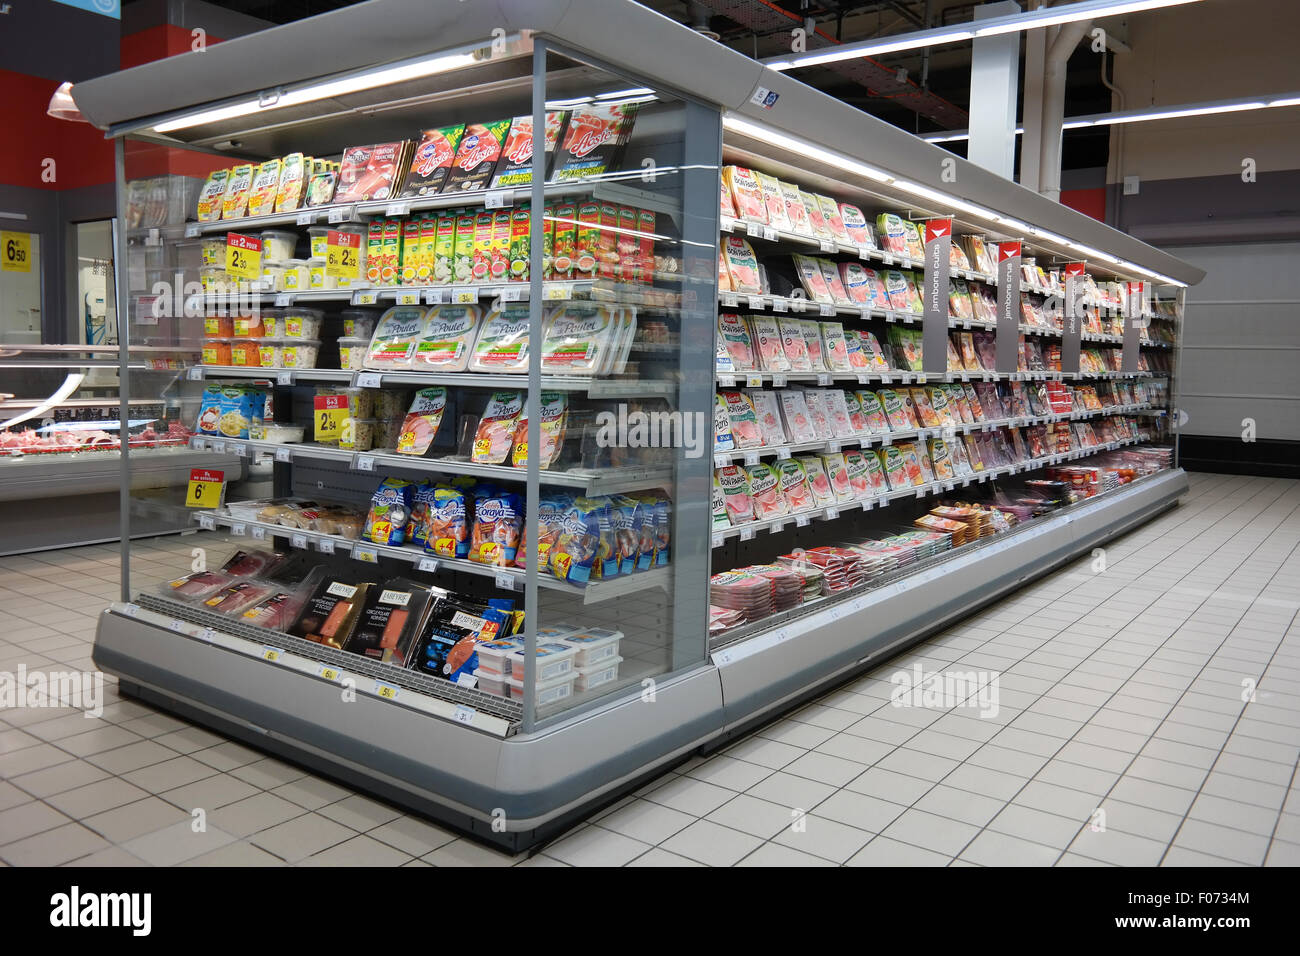 Refrigerator filled with processed meat products of a Carrefour supermarket. Stock Photo